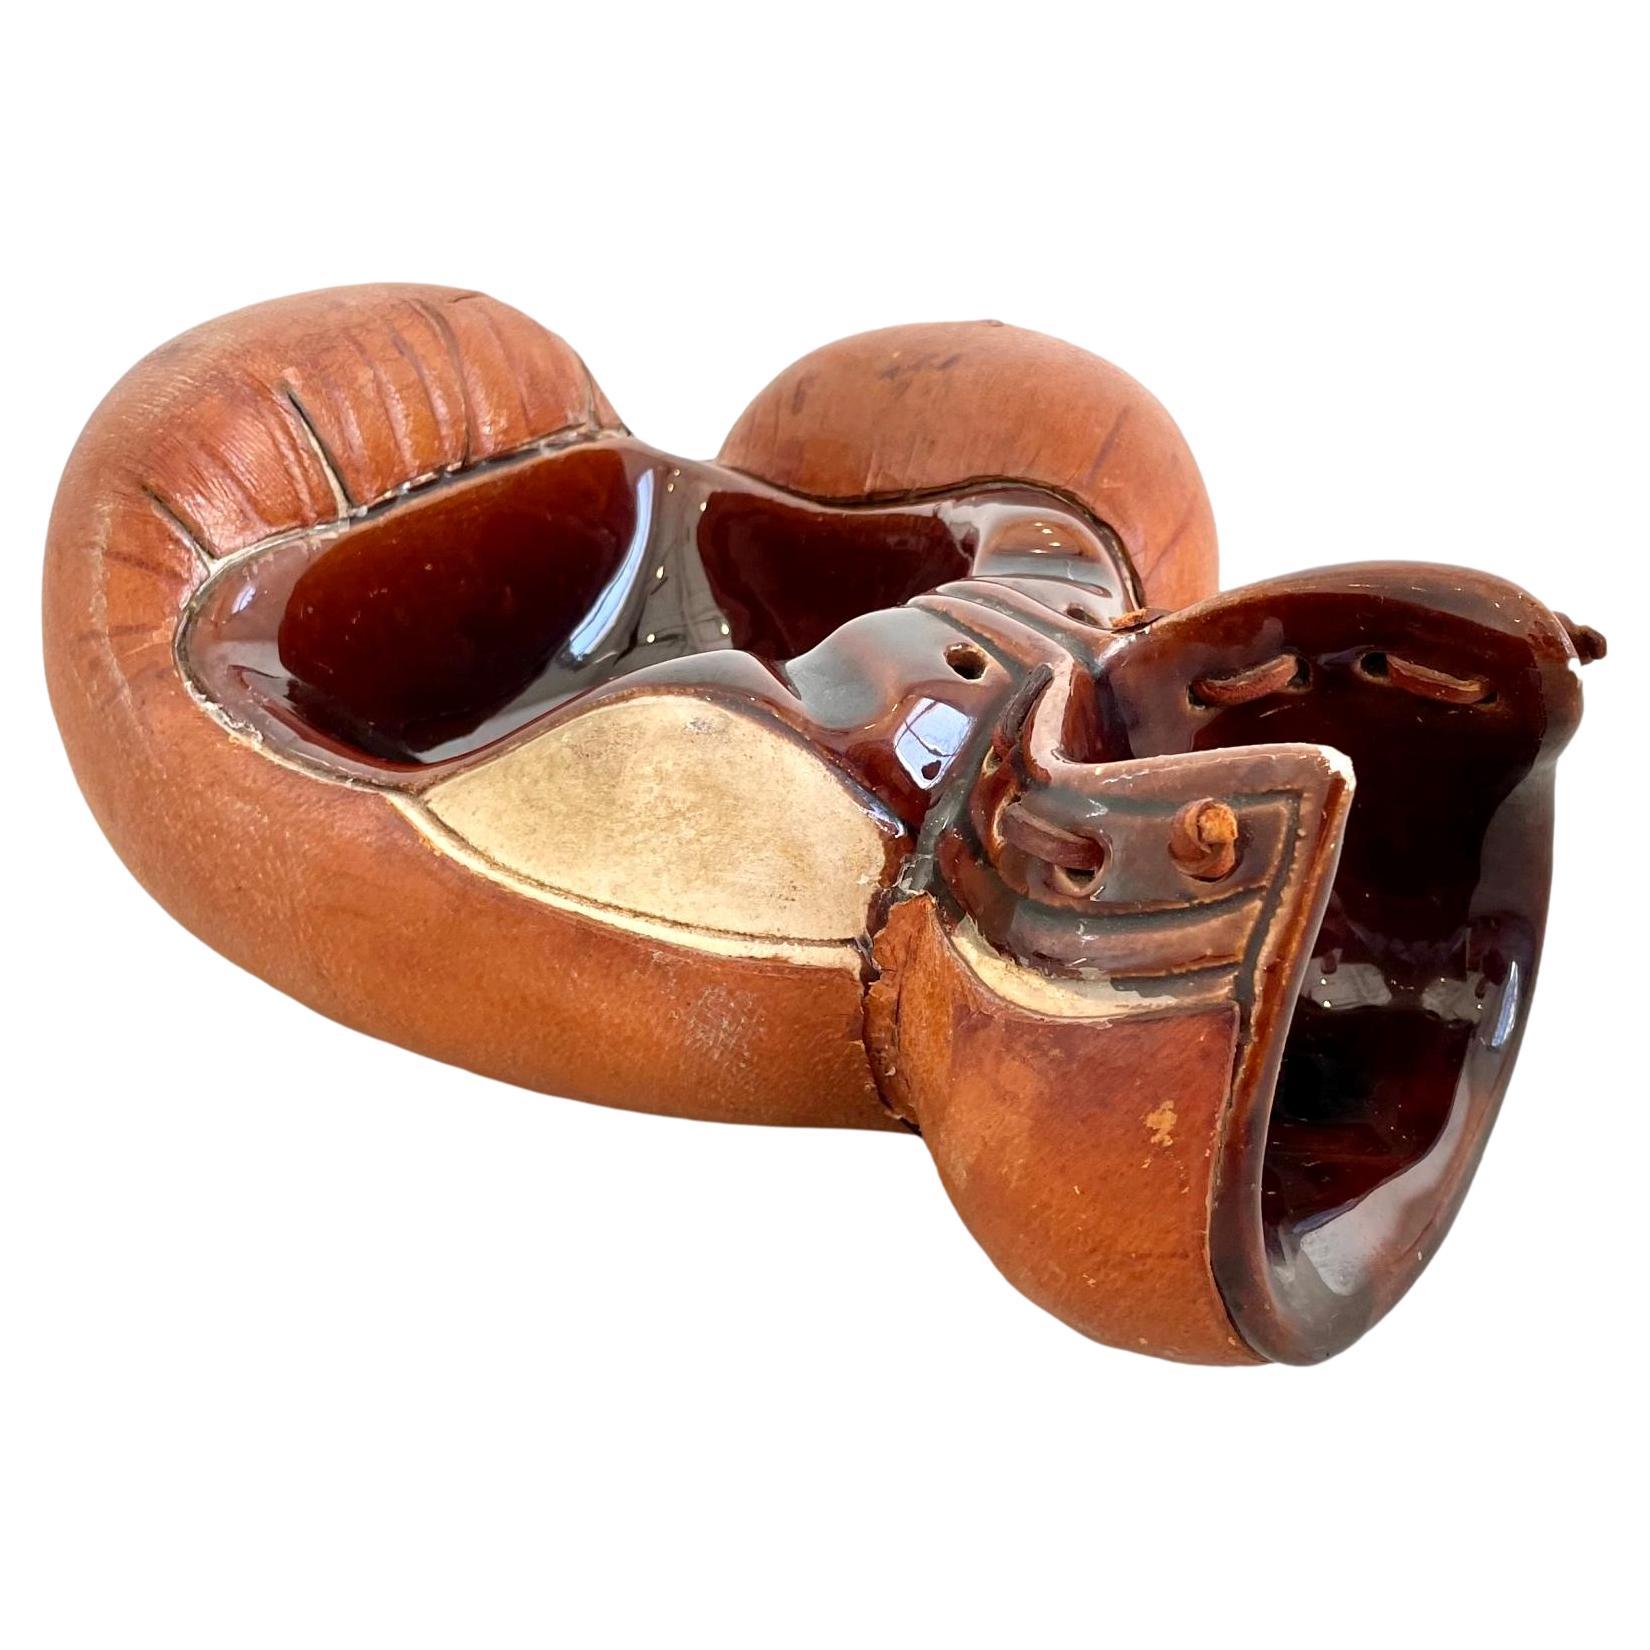 Longchamp Leather and Ceramic Boxing Glove Catchall, 1950s France For Sale